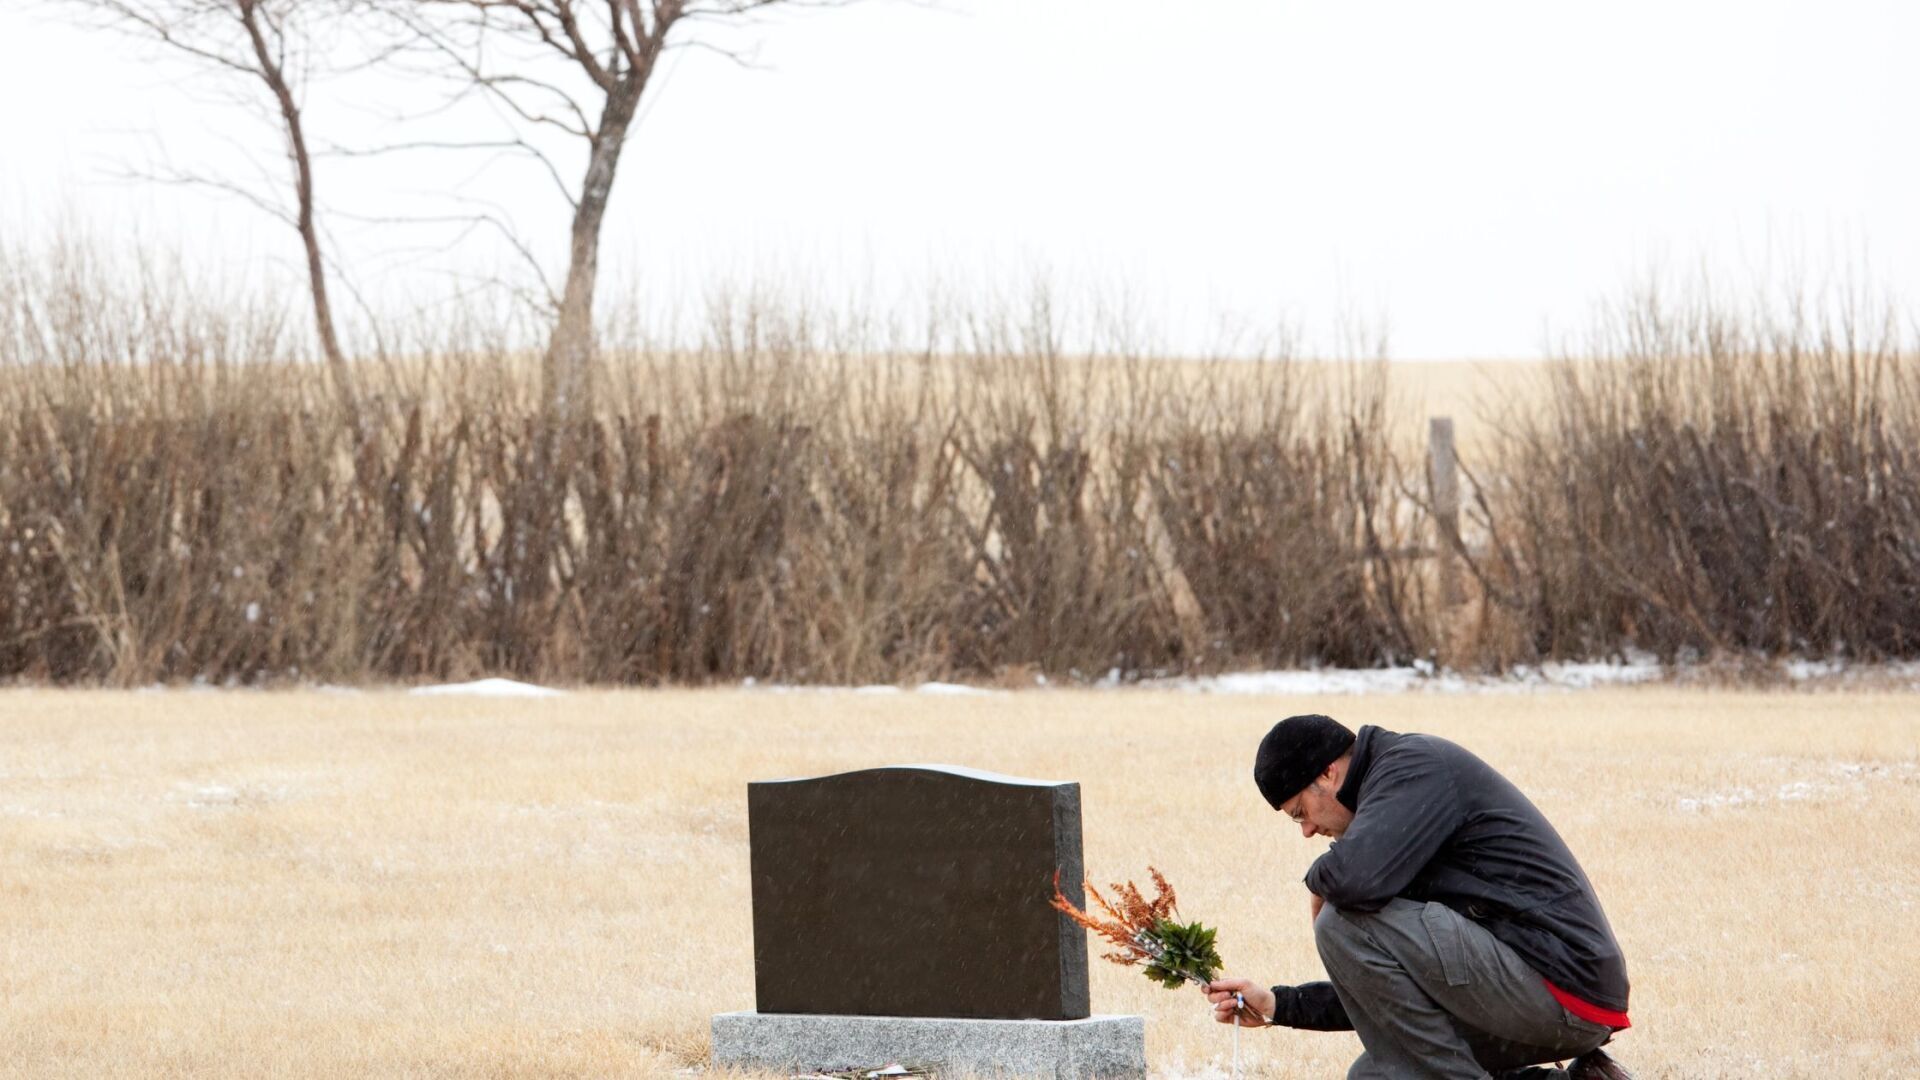 Elderly gentleman sitting at a loved ones grave putting flowers on the grave